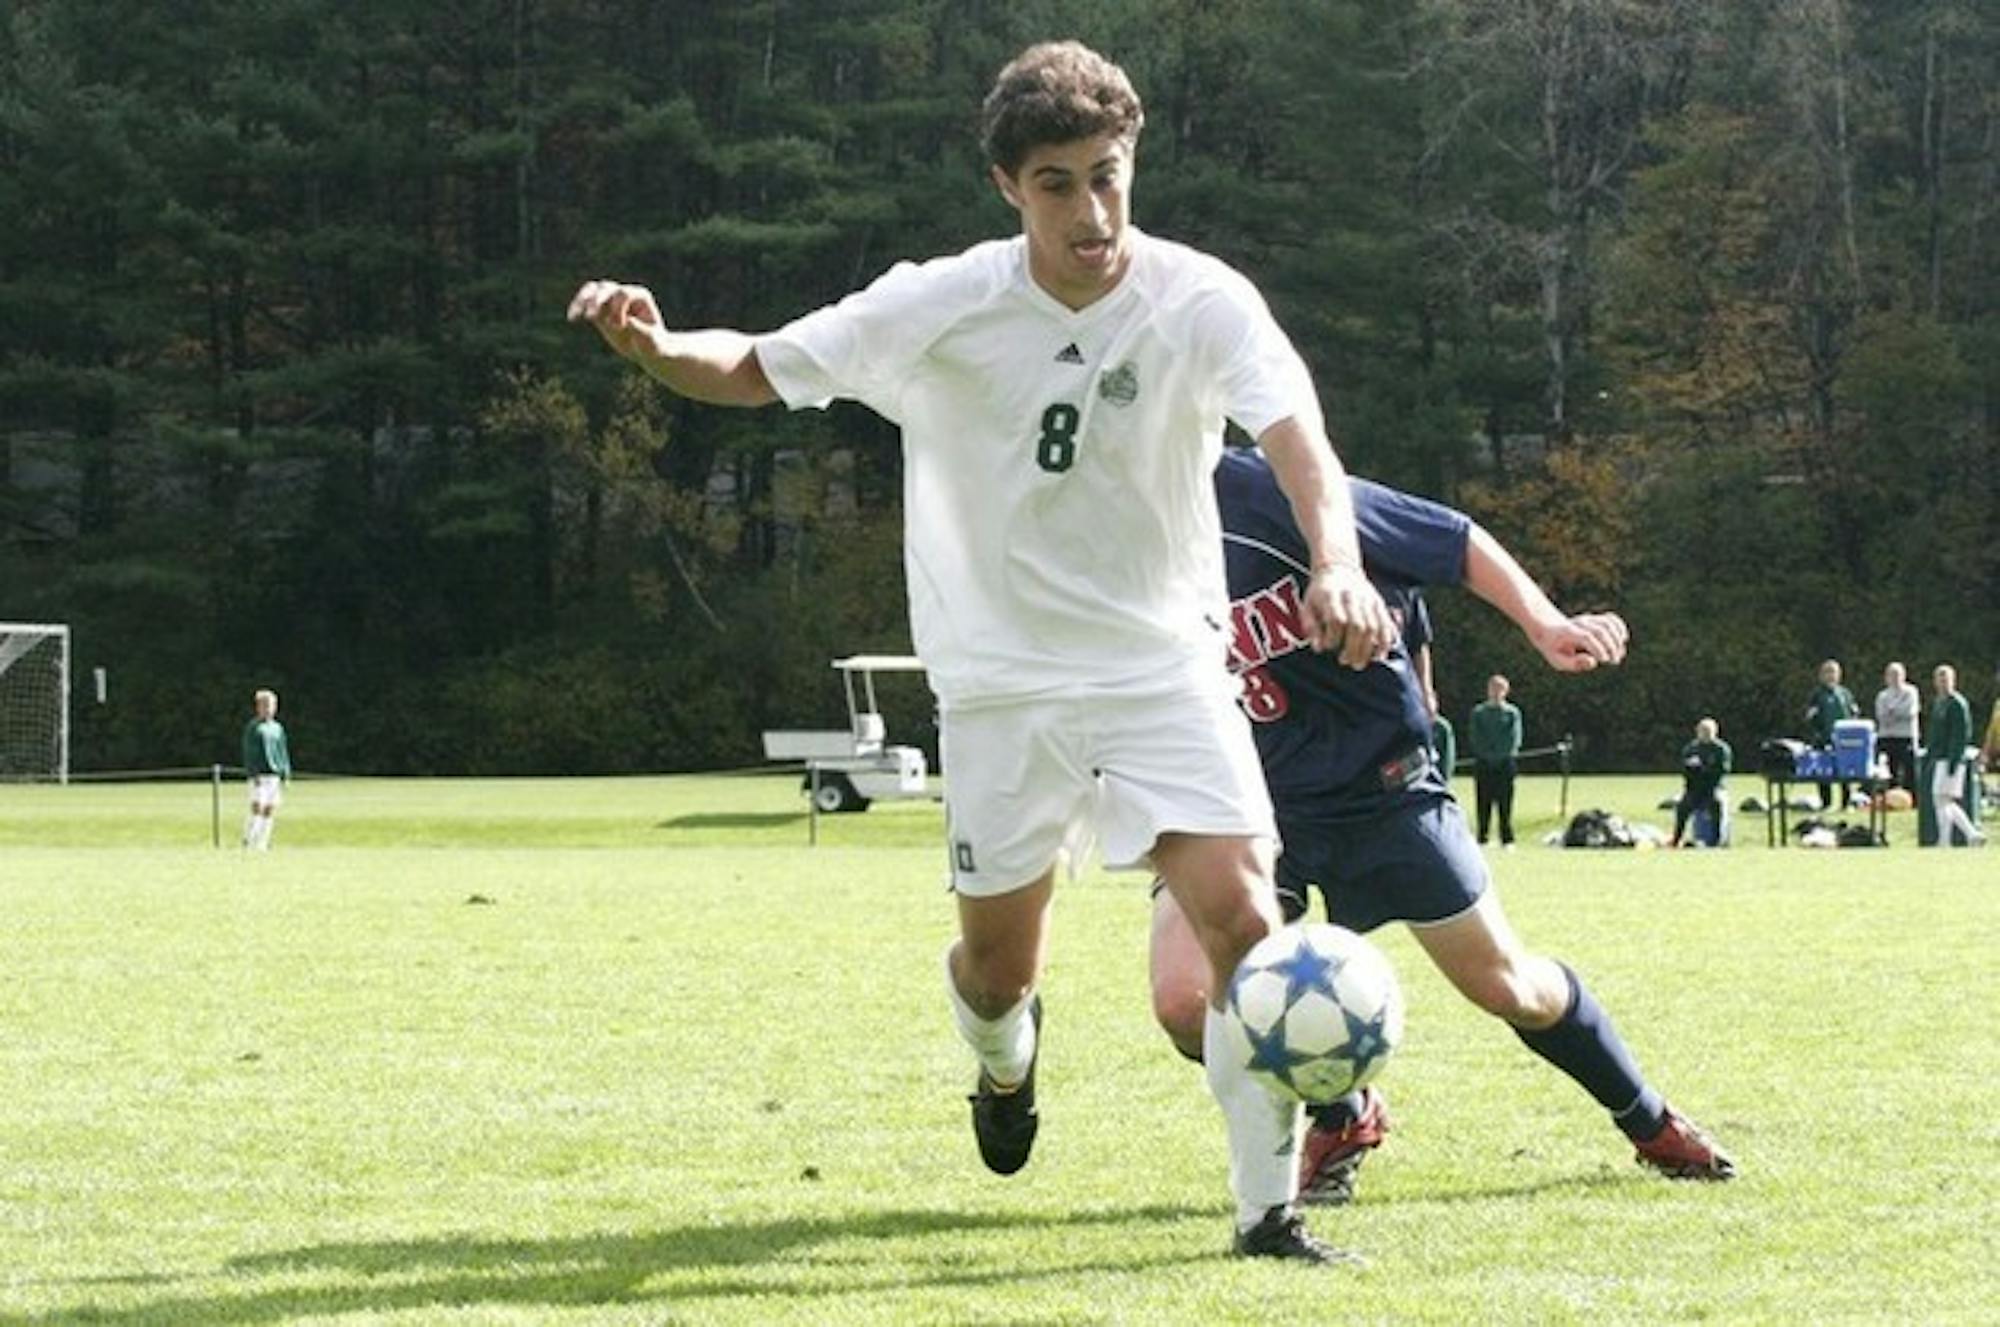 Mike Ordonez '08 and the men in green defeated first-place Penn for an important Homecoming victory.